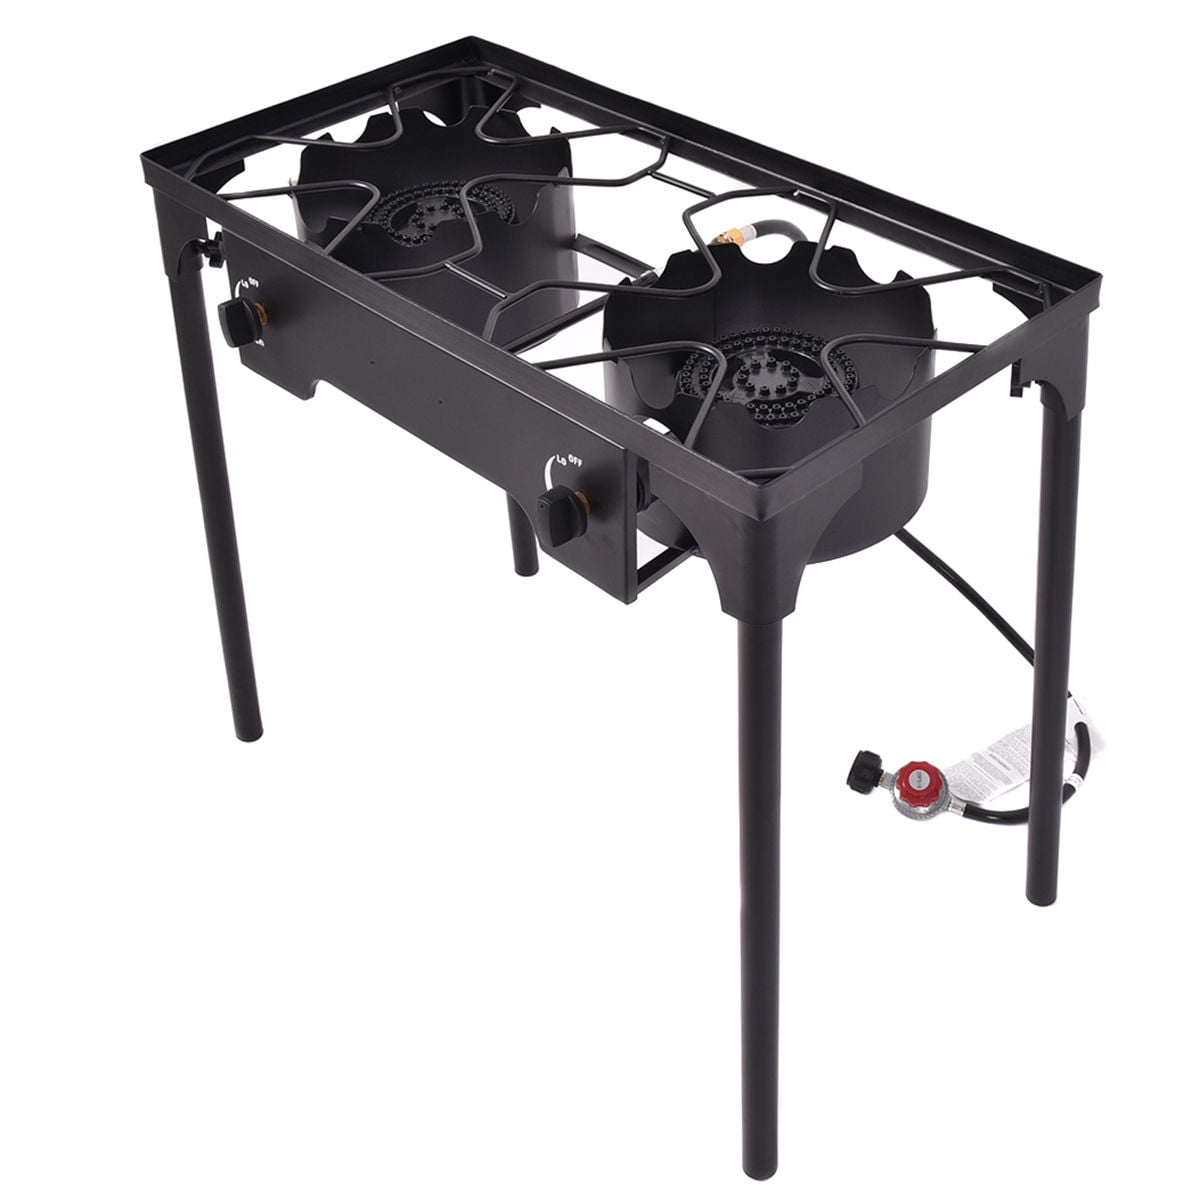 Two Burner 180000 BTU Sandinrayli Double Burner Outdoor Stand Stove Cooker Outdoor Camp Stove High Pressure Propane Gas w/Detachable Legs for Camp Cooking 